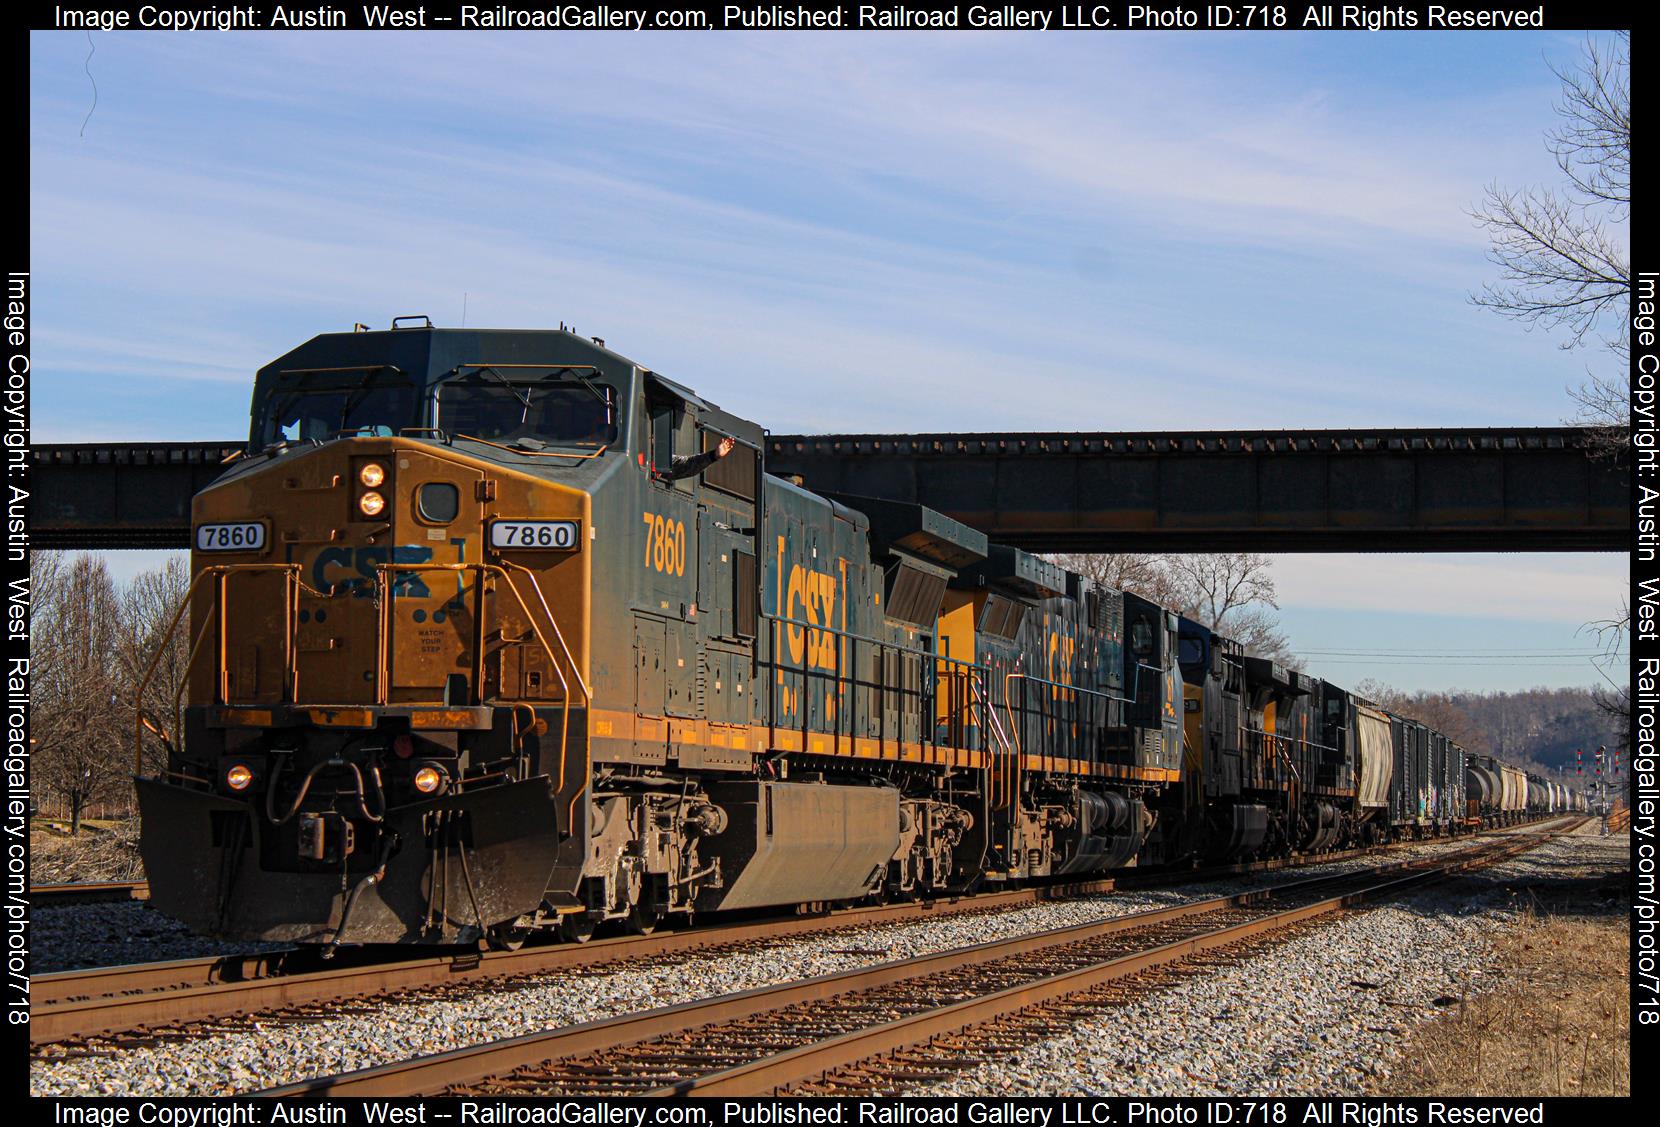 CSXT 7860 is a class GE C40-8W (Dash 8-40CW) and  is pictured in Kenova, West Virginia, USA.  This was taken along the Kanawha Subdivision  on the CSX Transportation. Photo Copyright: Austin  West uploaded to Railroad Gallery on 02/21/2023. This photograph of CSXT 7860 was taken on Sunday, January 15, 2023. All Rights Reserved. 